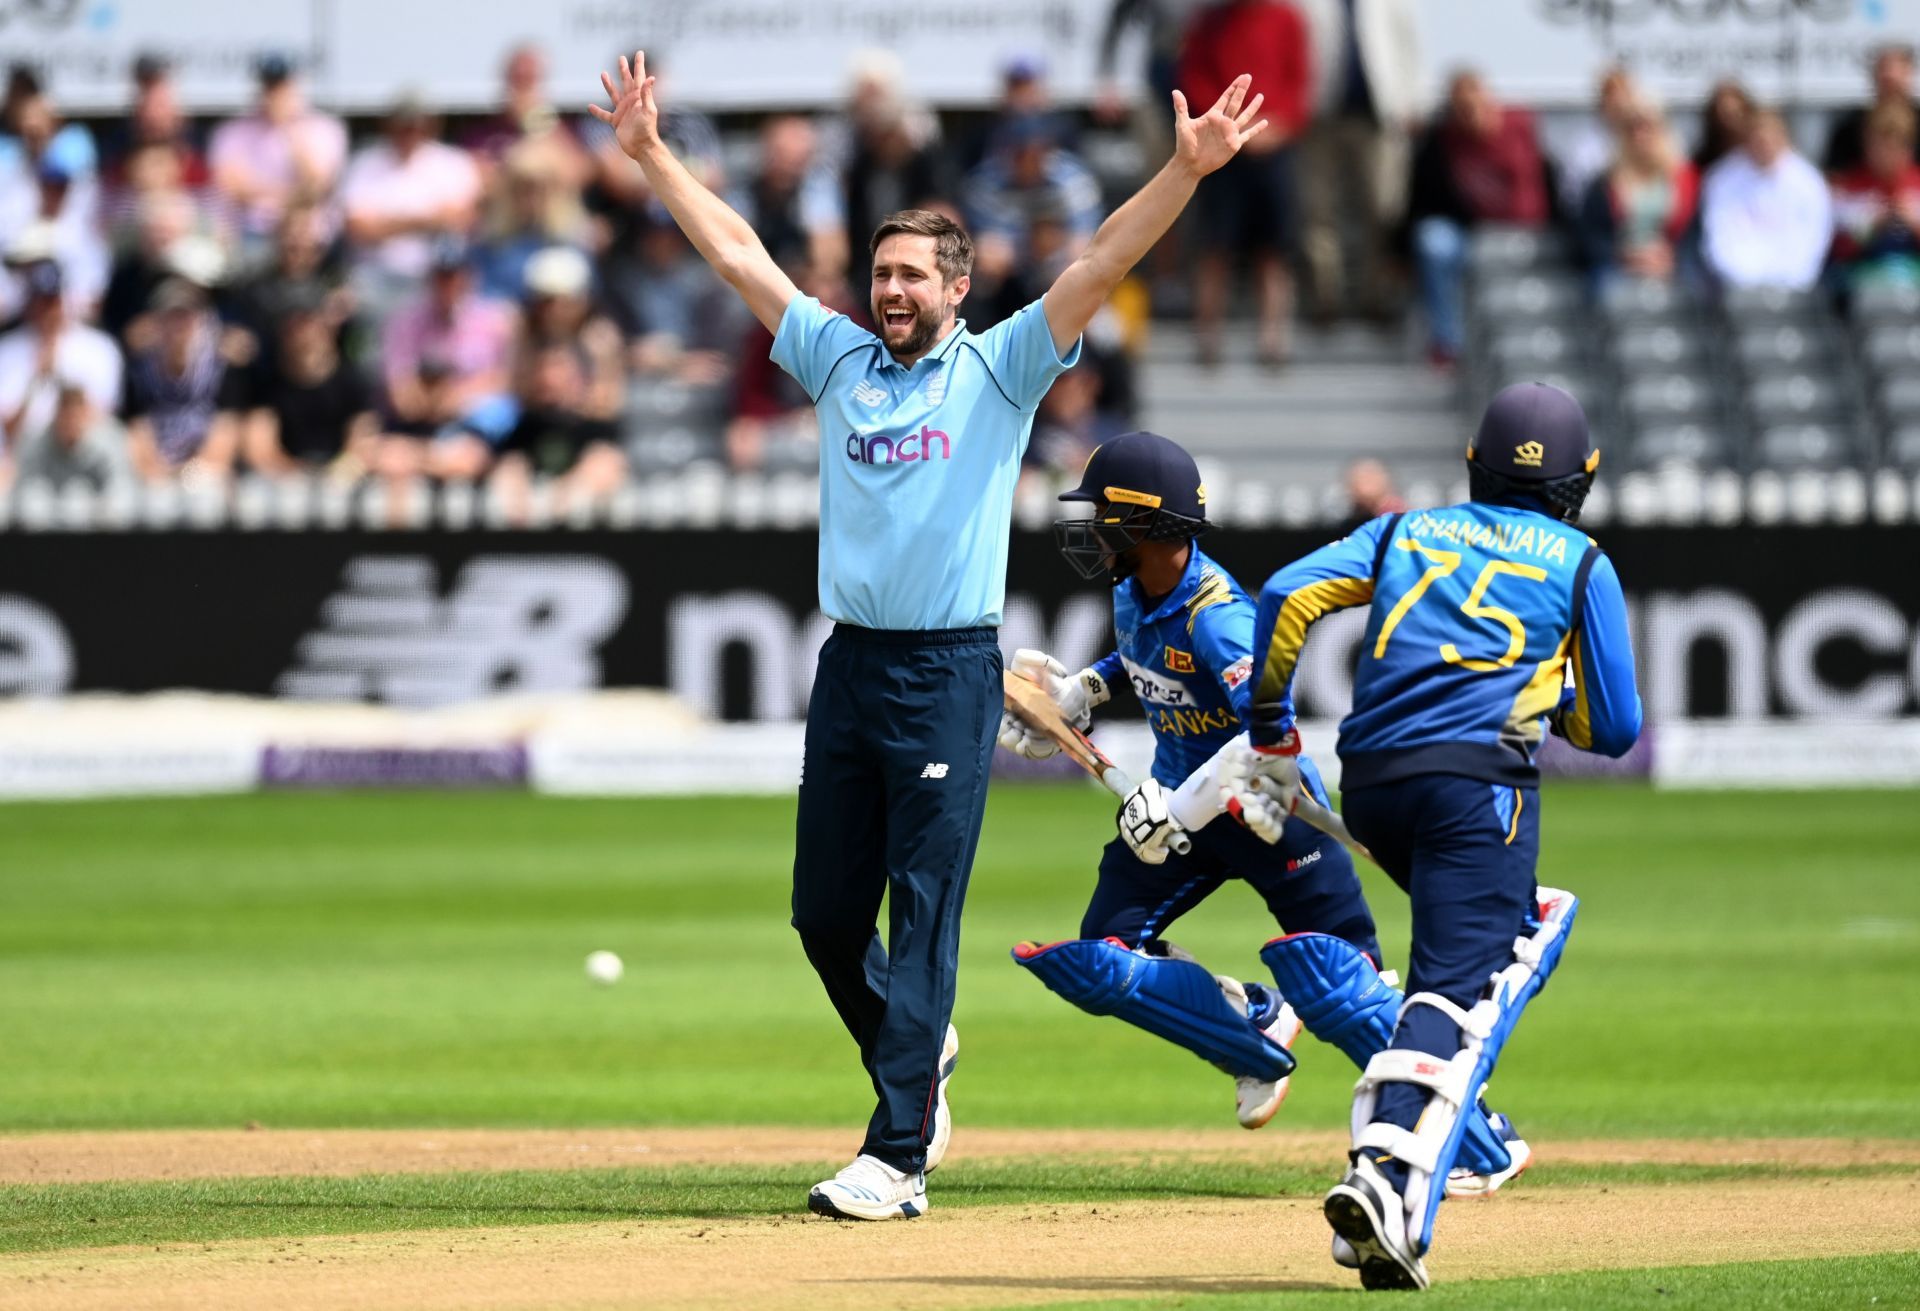 Chris Woakes will be the player to look out for in the T20 World Cup 2021 match between England and Sri Lanka